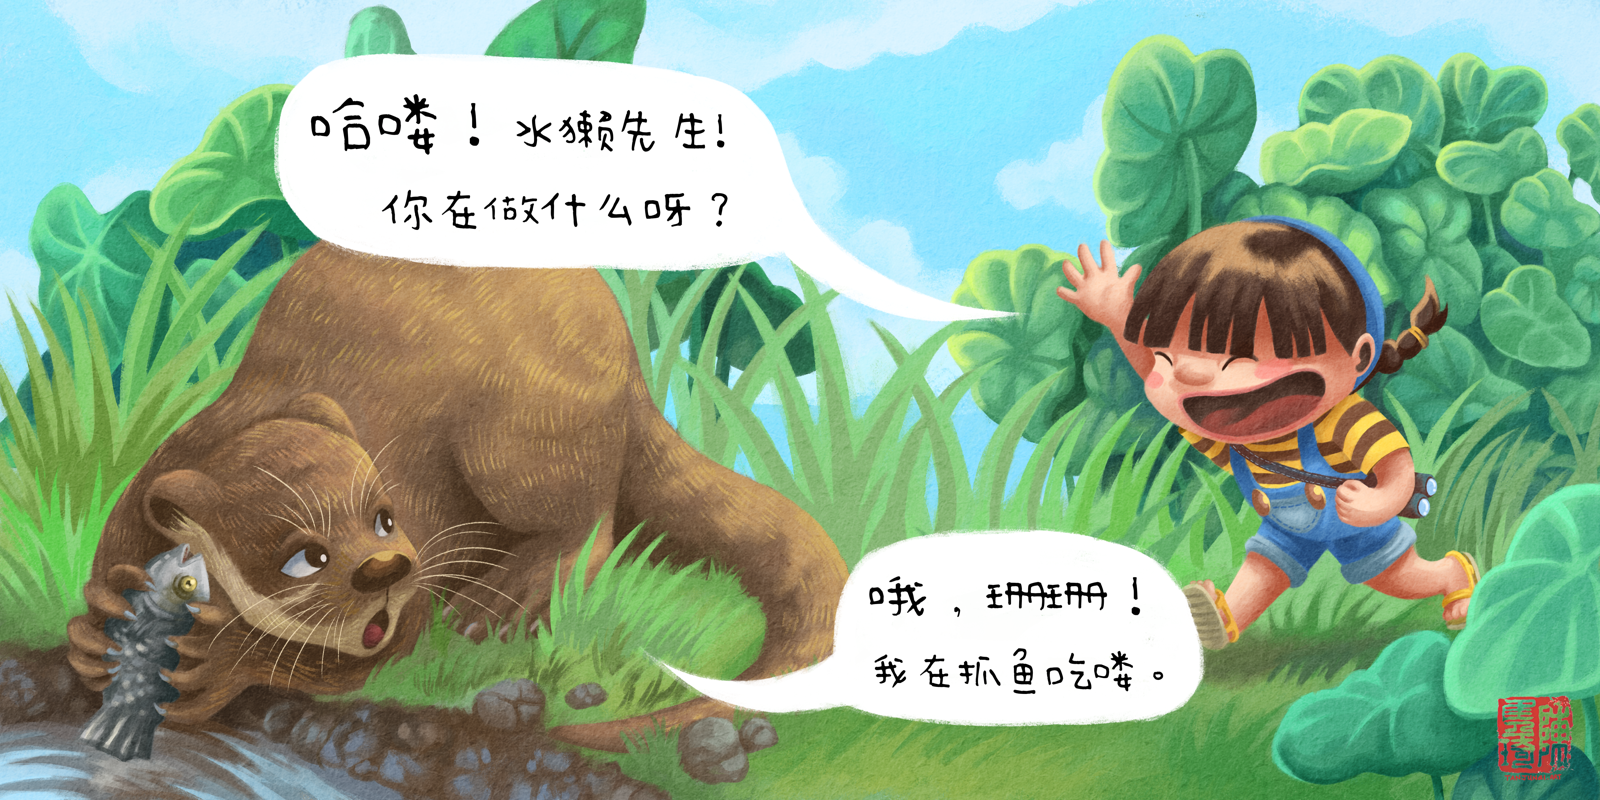 A two-page spread from 'Shan Shan and Mr. Otter' (chinese version), showing Shan Shan running towards Mr. Otter and greeting him in a park full of lush vegetation. Mr. Otter is holding a fish and squatting next to a river.